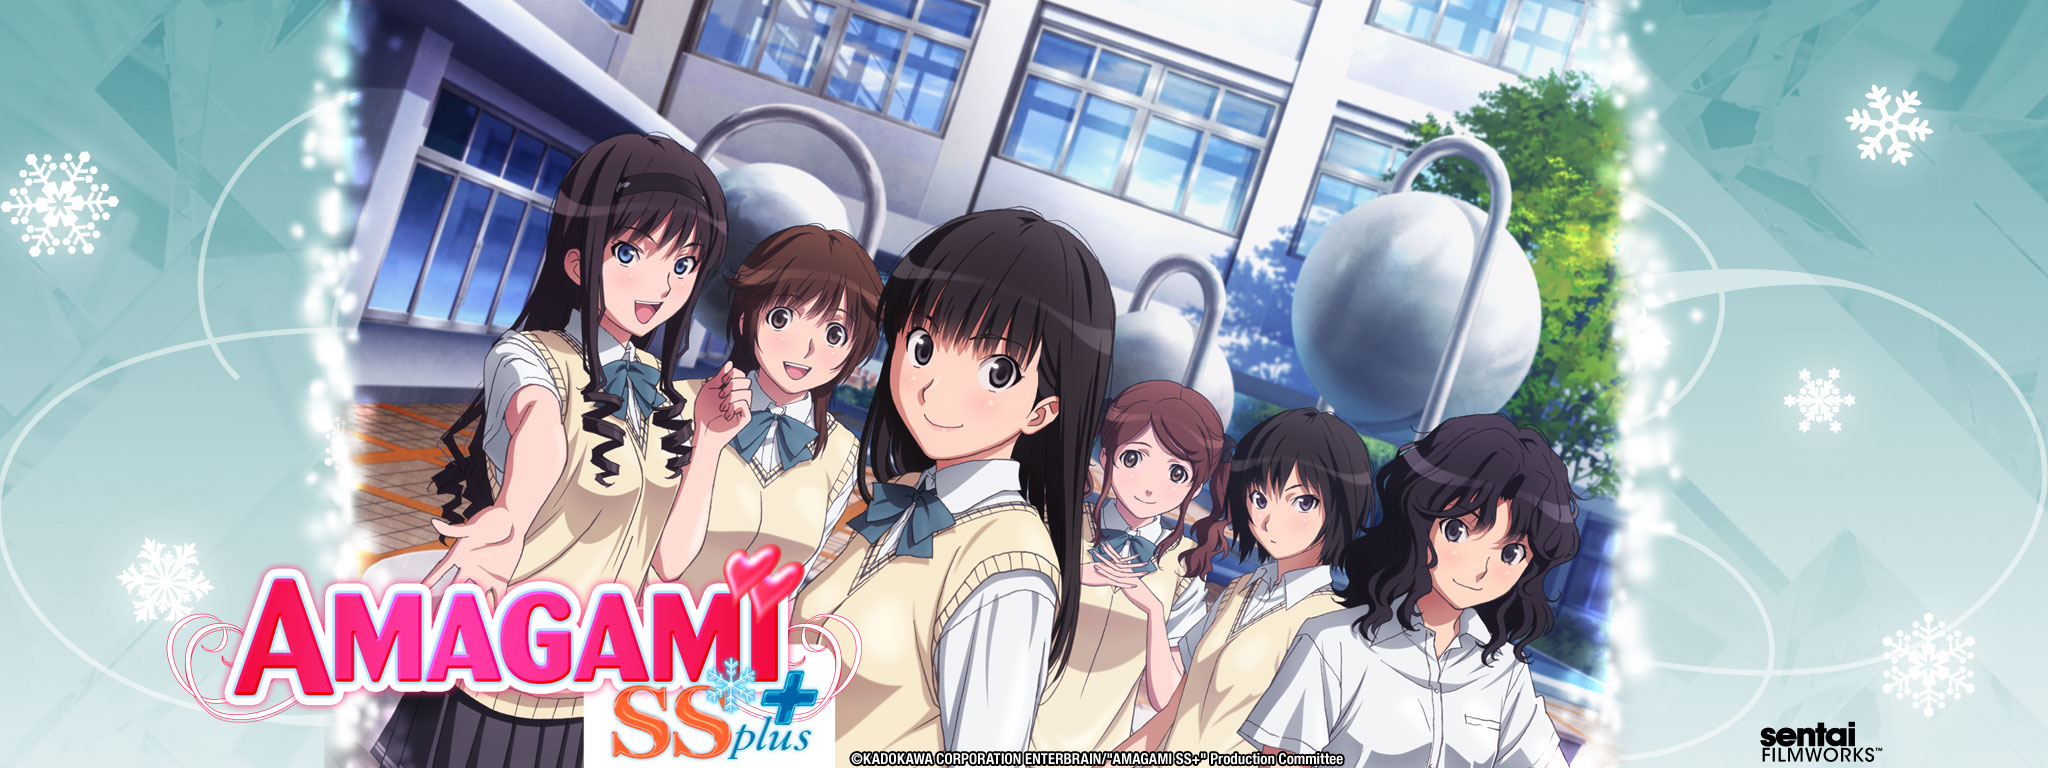 Title Art for Amagami SS+